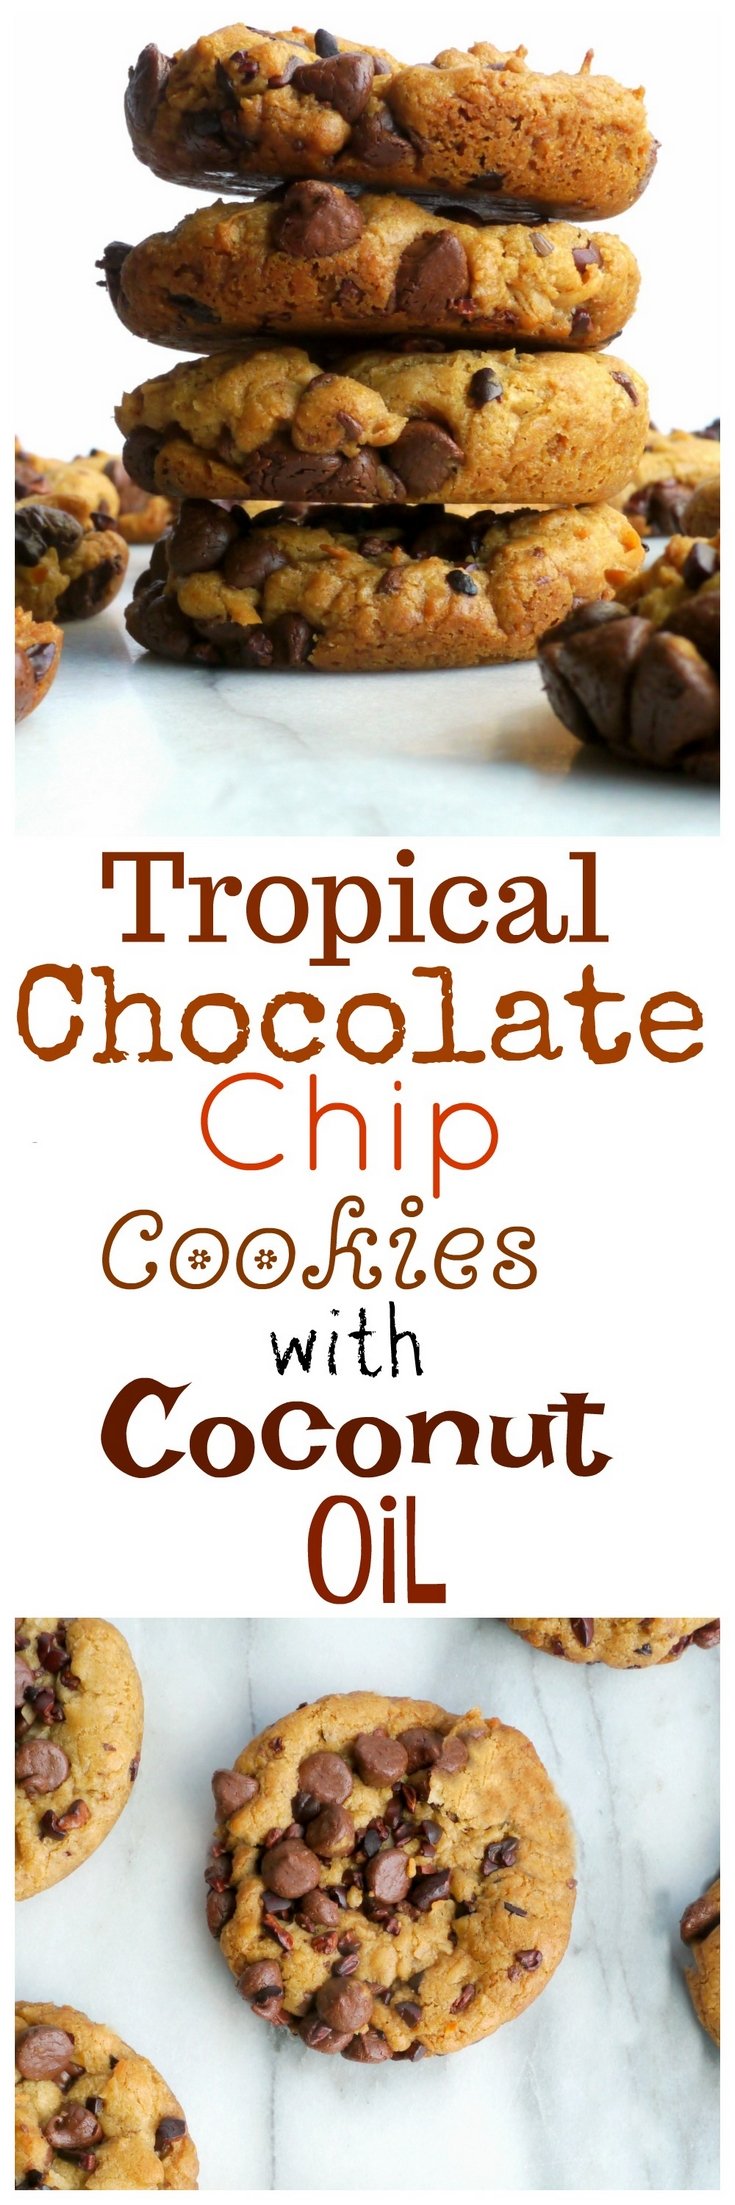 Crisp on the outside, soft on the inside, these Tropical Chocolate Chip Cookies with Coconut Oil might have you thinking you've been swept away to an island paradise from NoblePig.com. via @cmpollak1